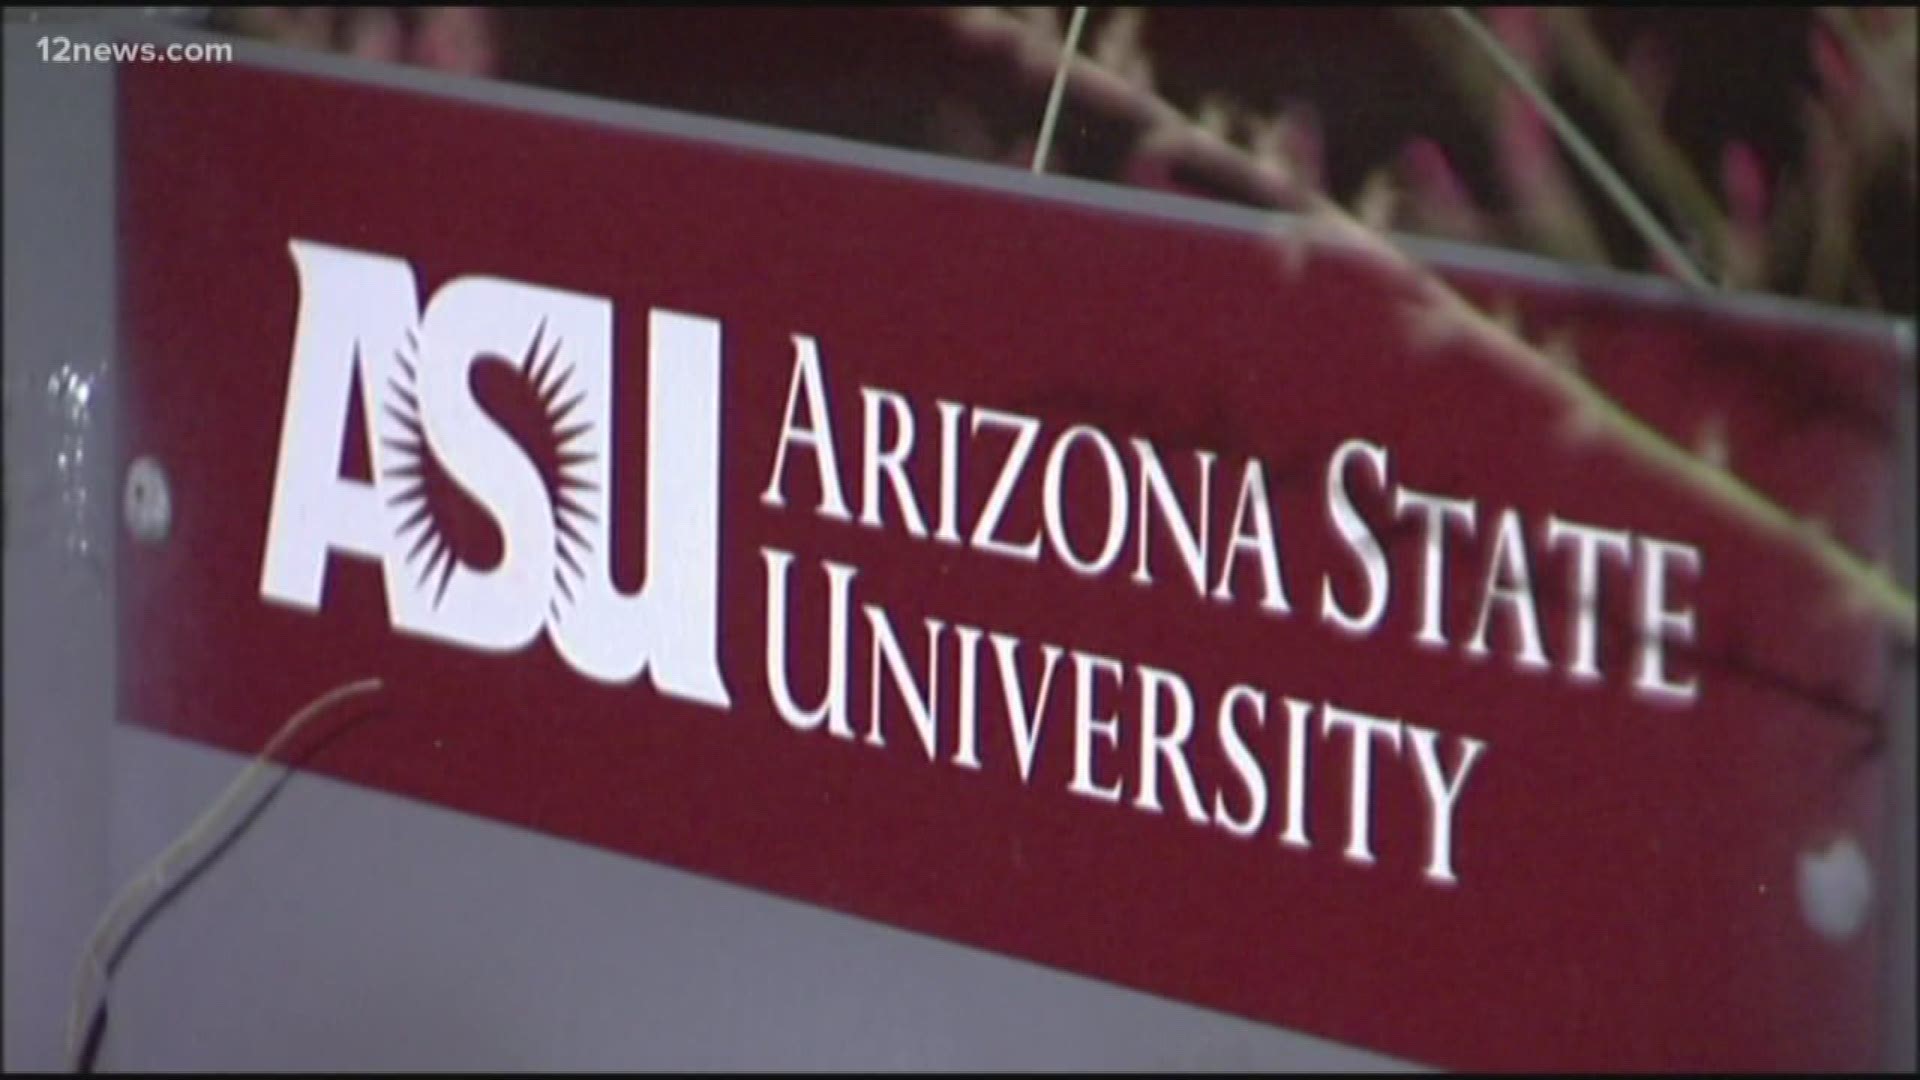 Arizona State University Police said they received another report of a sexual assault that happened in a residence hall at the university.